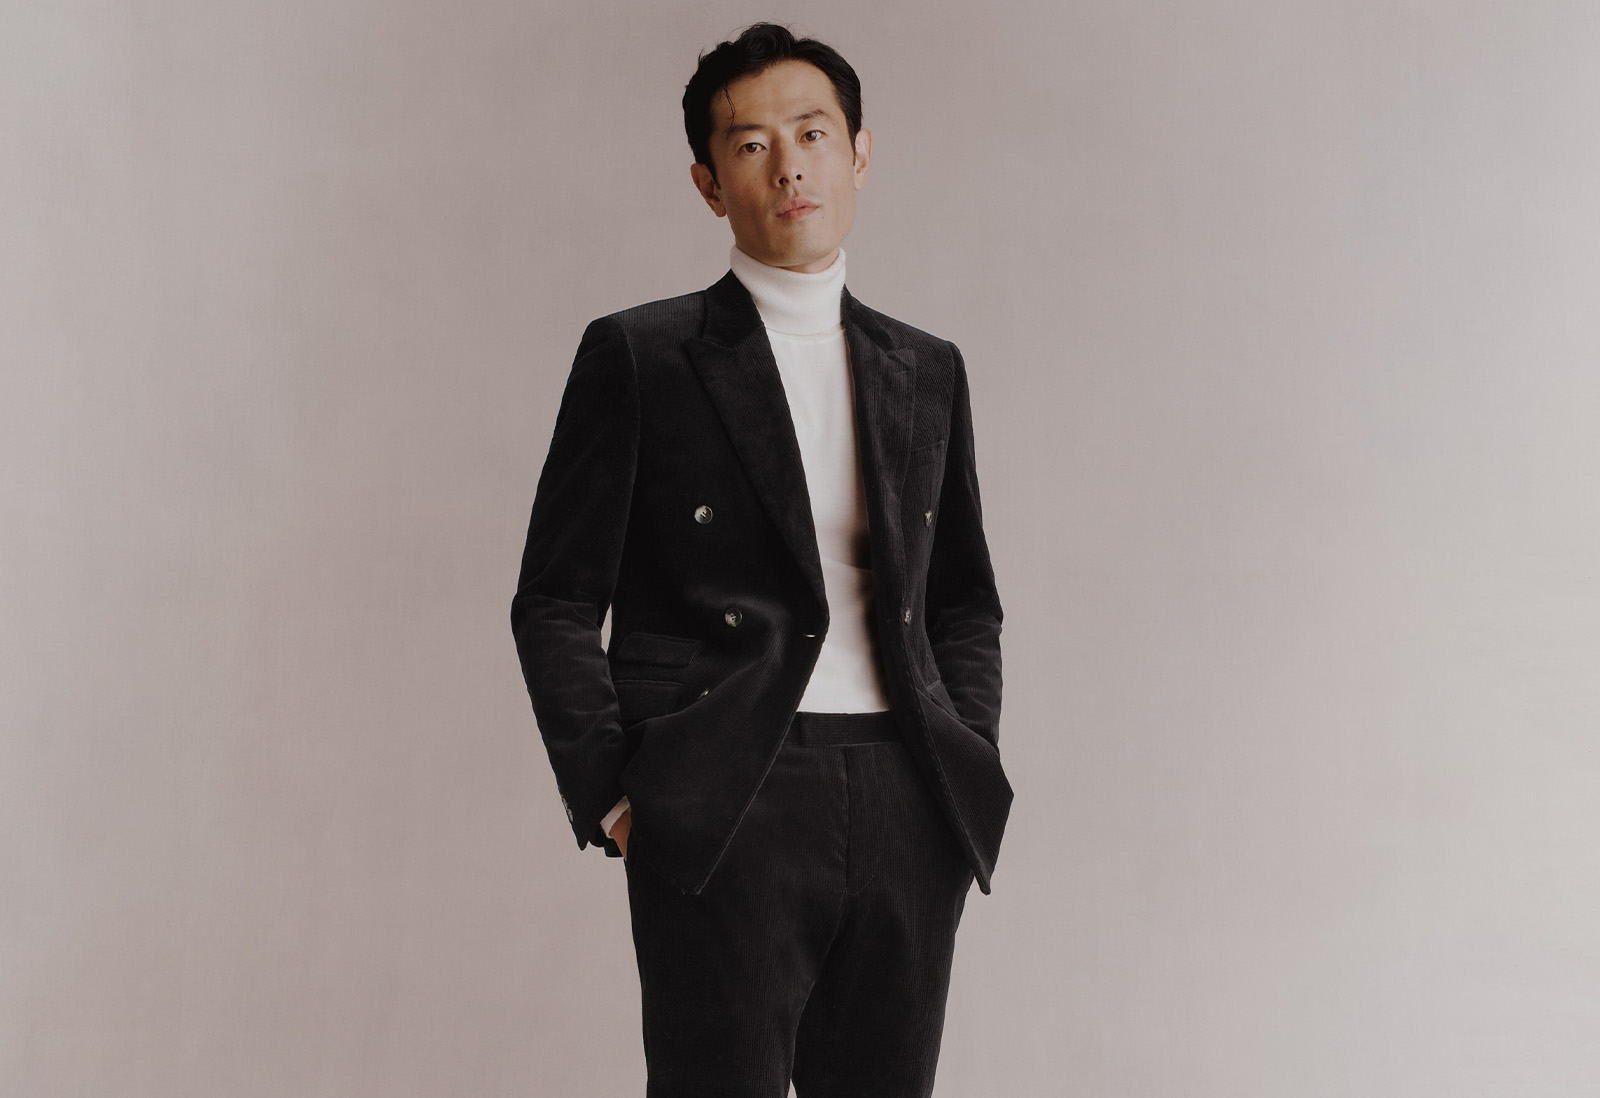 Groom in corduroy statement suit, black with a white rollneck.